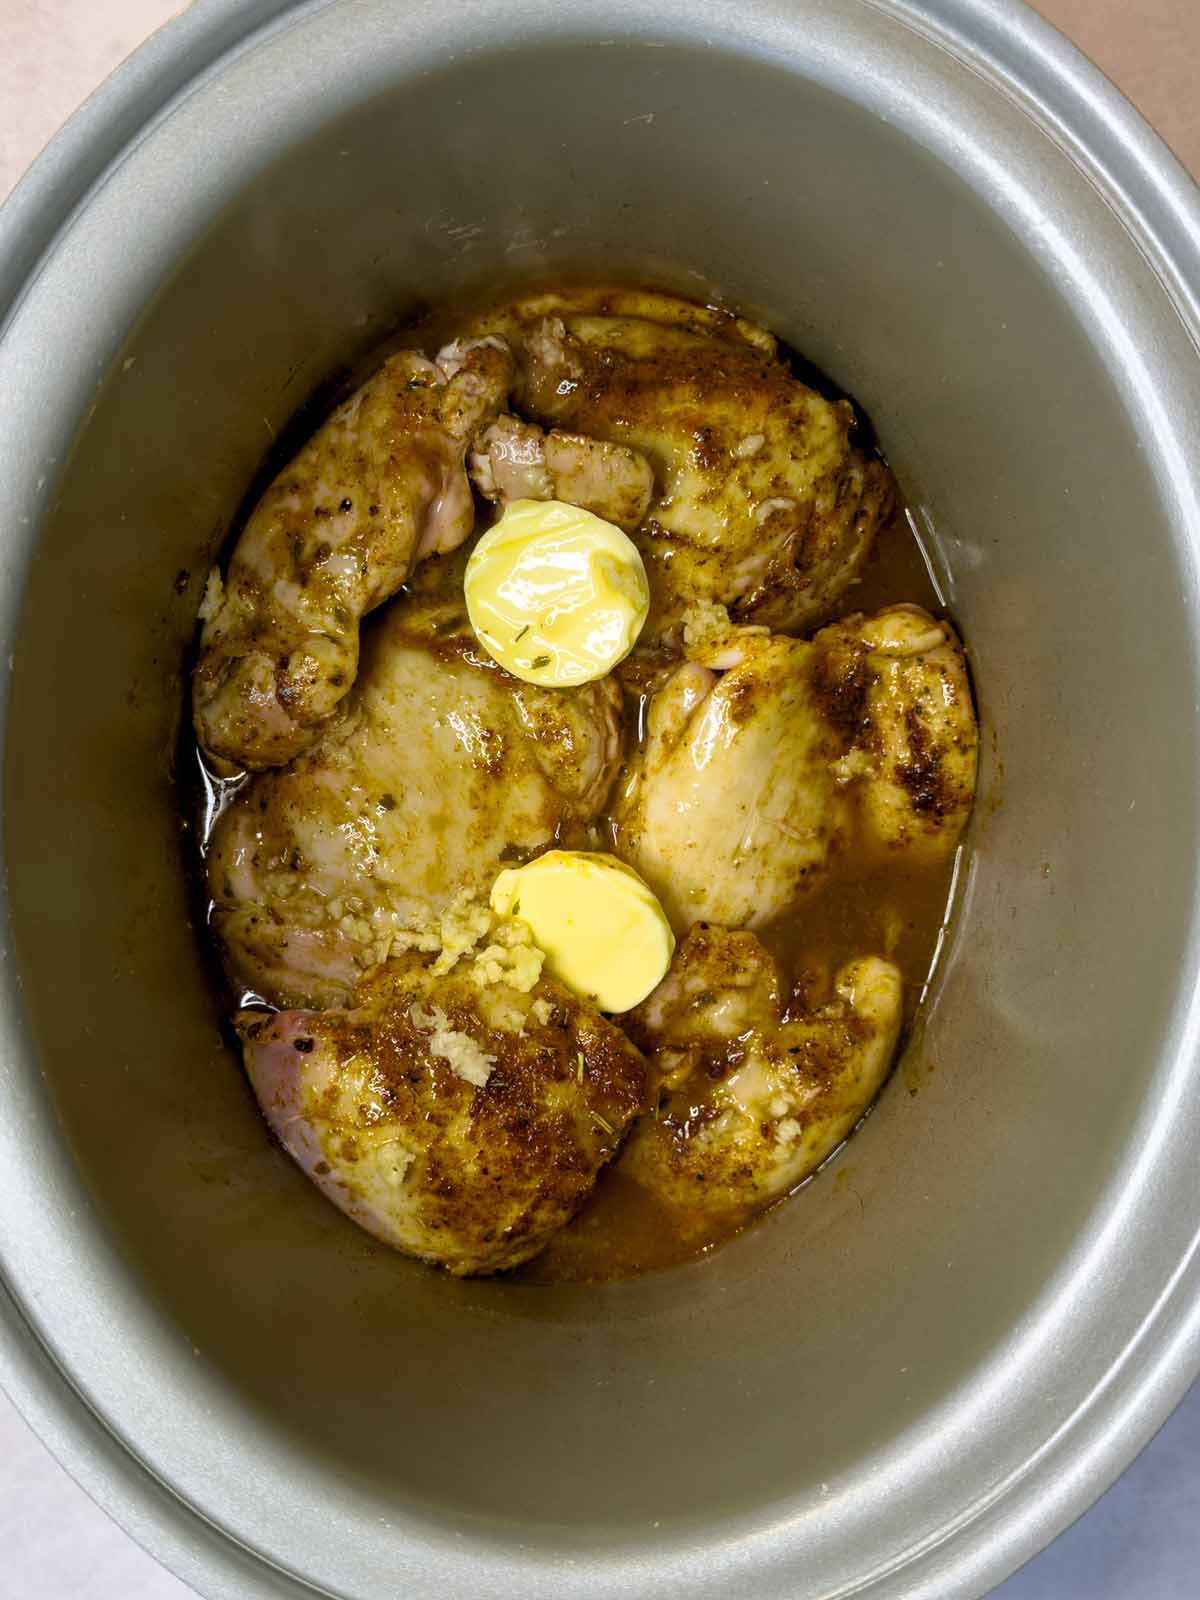 Two knobs of butter and stock added to the slow cooker.